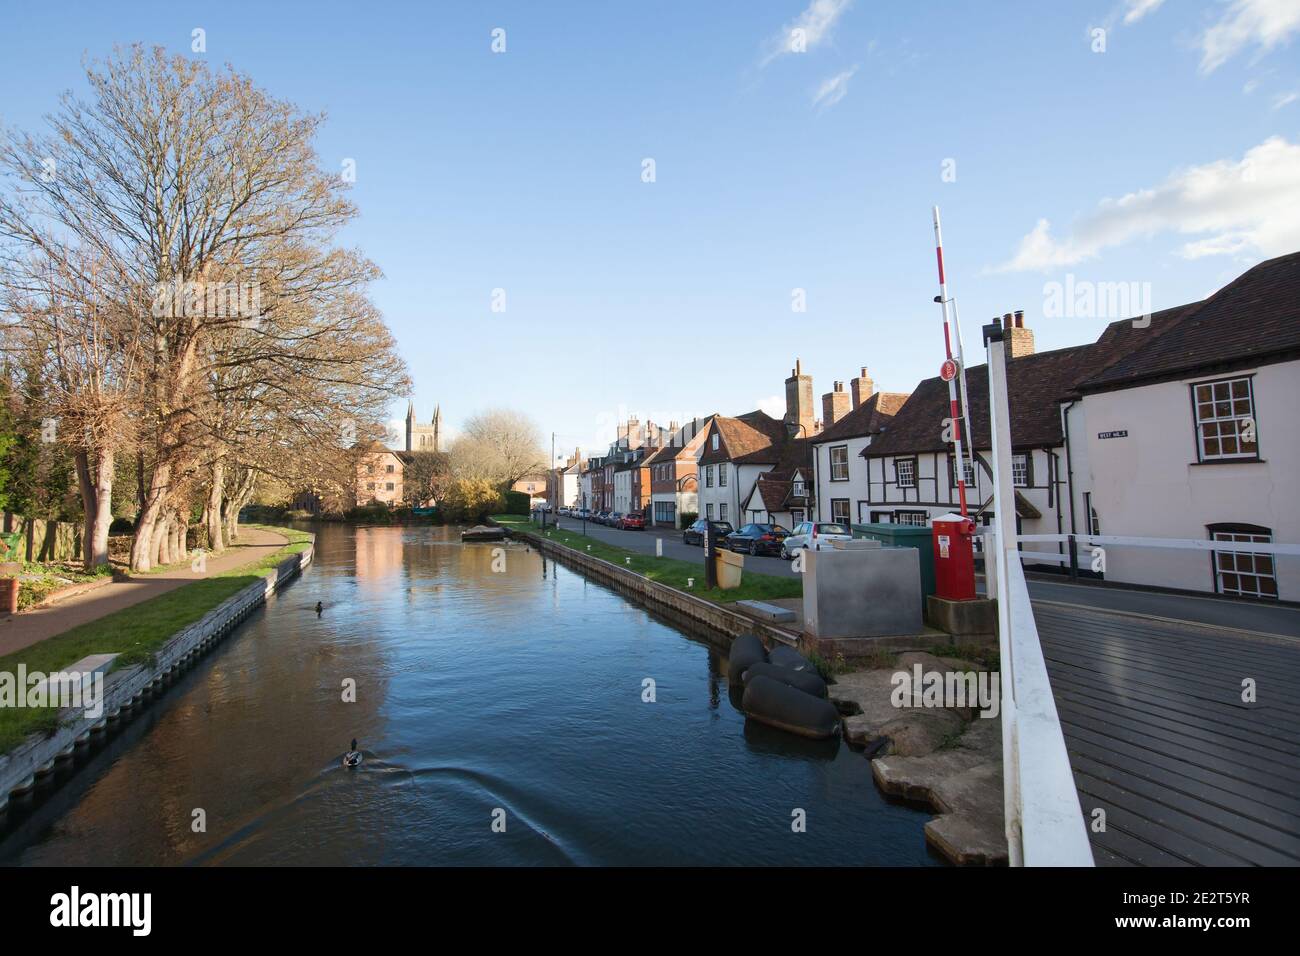 Views from the lock in Newbury, West Berkshire in England, taken on the 19th November 2020 Stock Photo